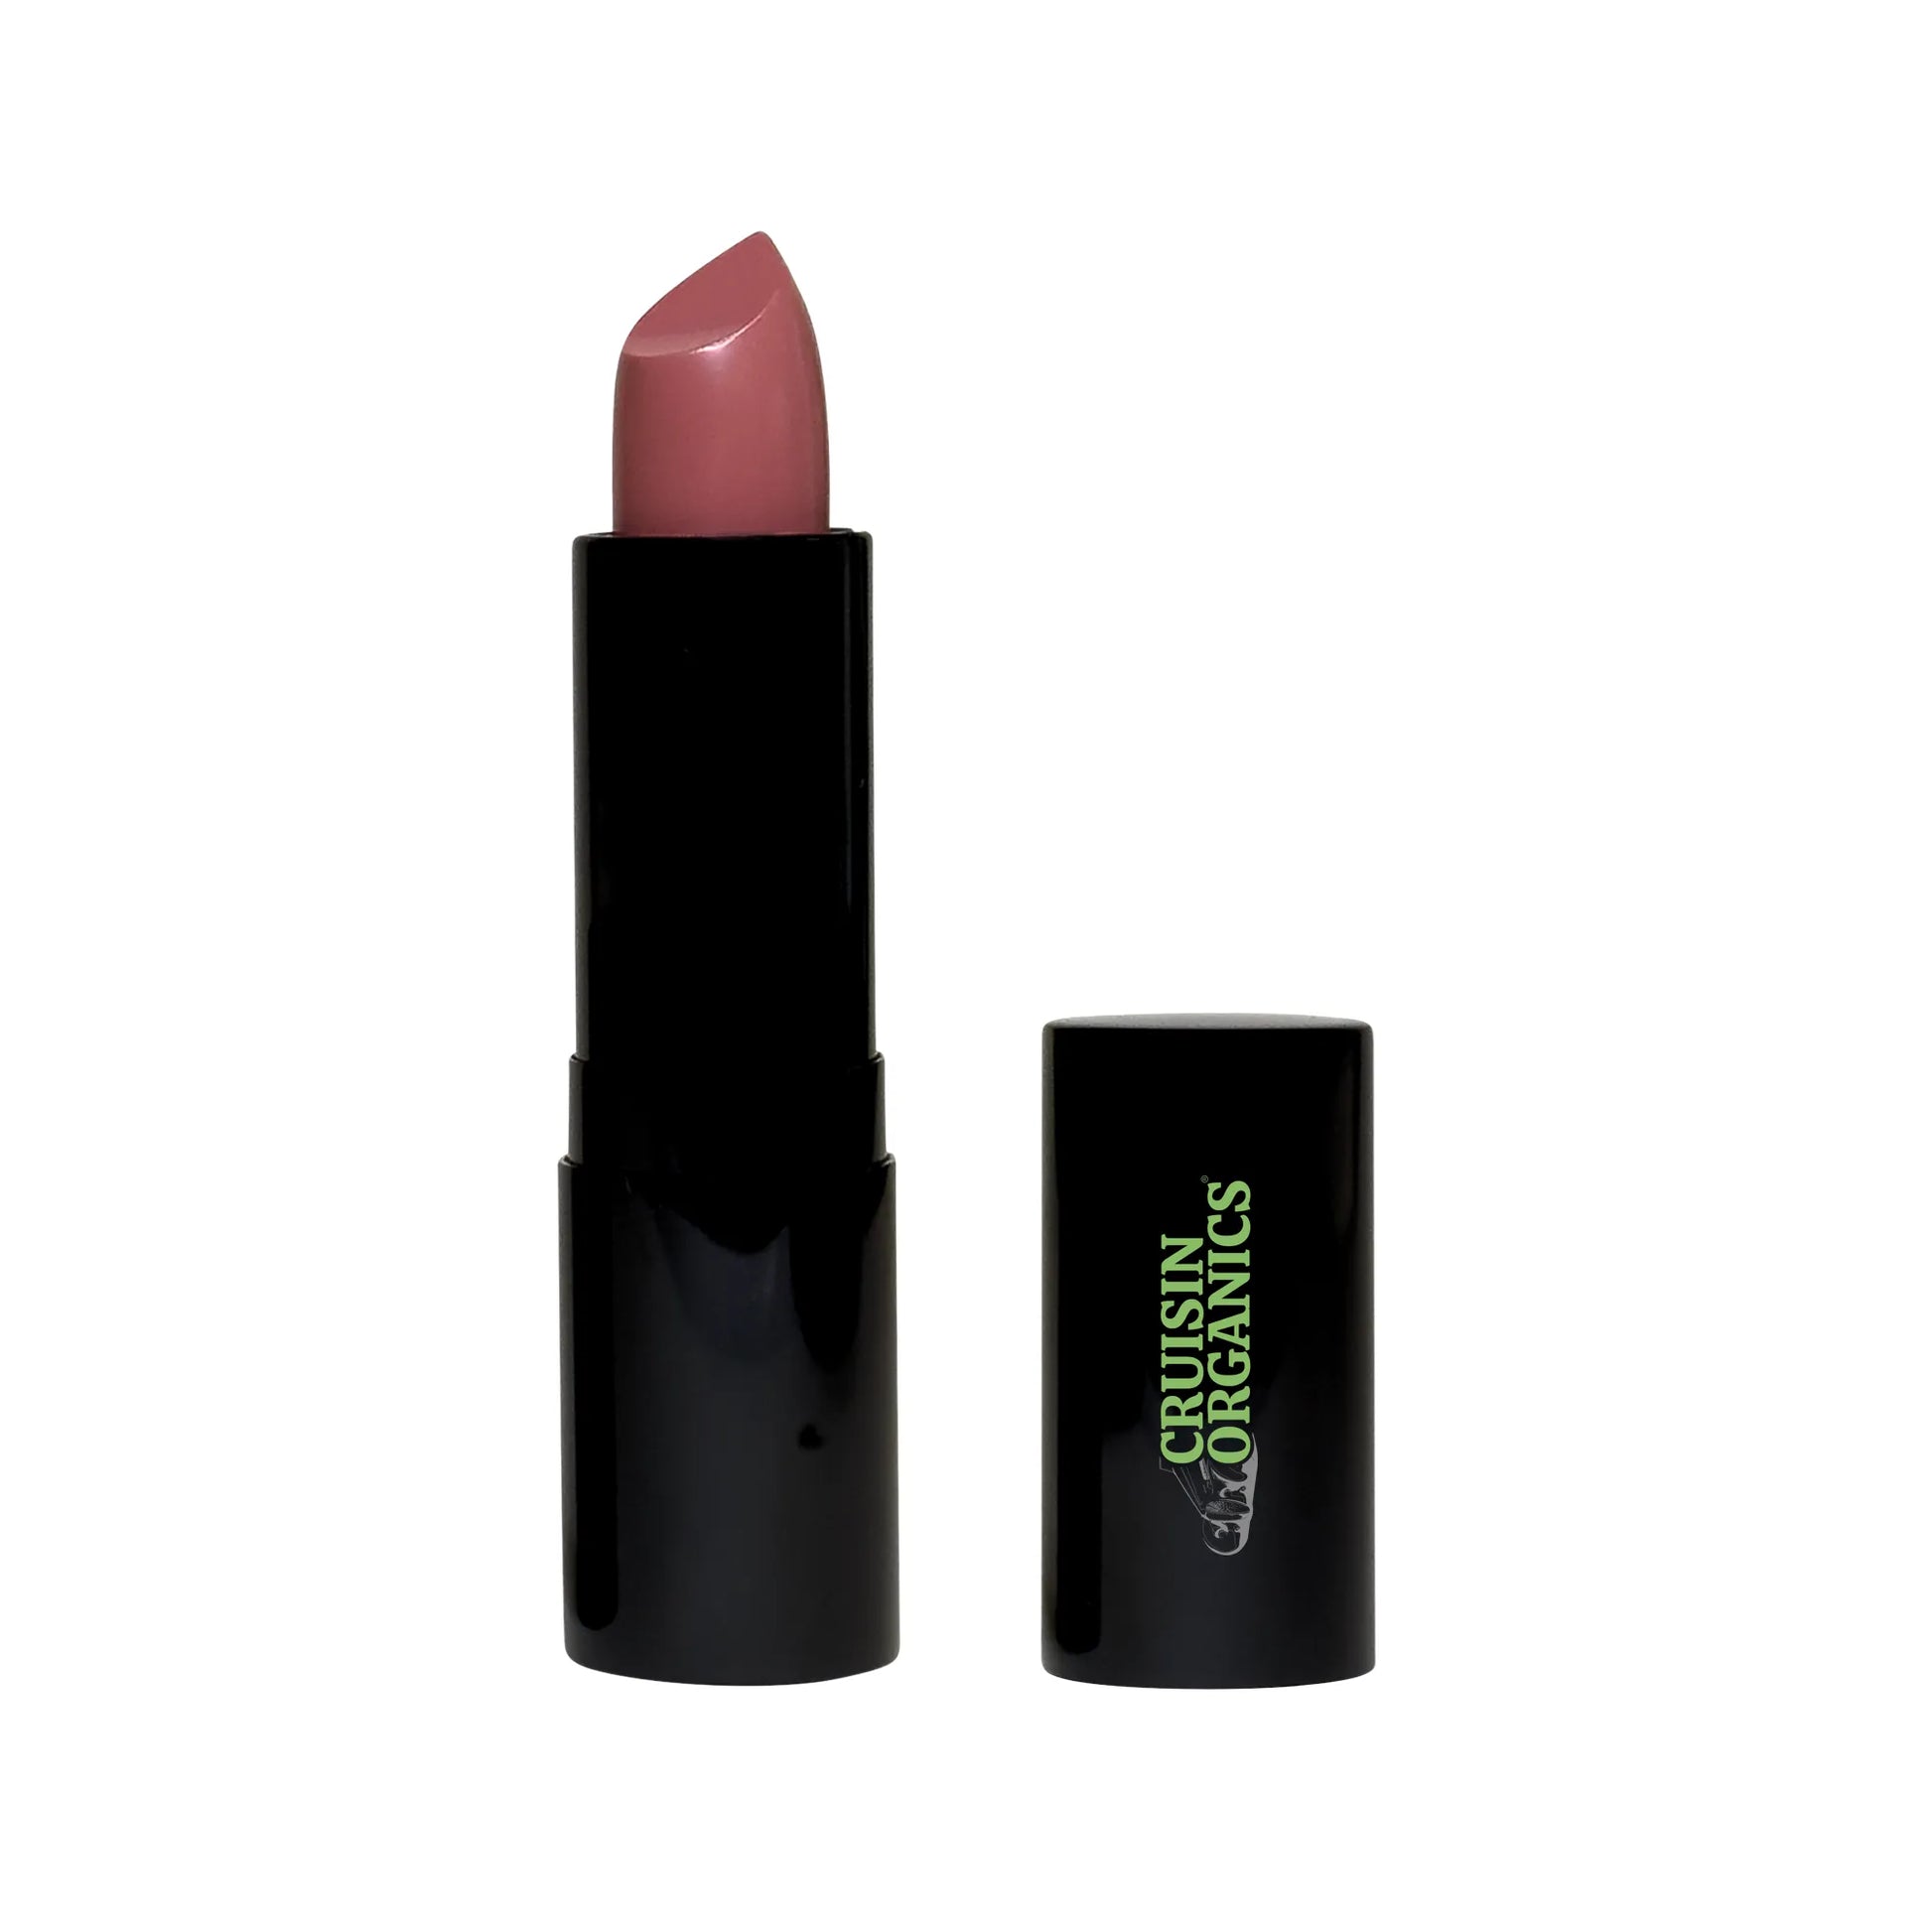 Complement any wardrobe and suit every mood effortlessly with our enduring, vivid Cruisin Organics Parisian Pink Cream Lipstick. Enriched with shea and mango butters, squaline oil, argan oil, vitamin E, murumuru oil, macadamia seed oil, grape seed, olive, camelina, and meadowfoam oils, your lips will remain moisturized throughout those extended days. The fusion of argan, olive, grape seed, and macadamia seed oils guarantees maximum lip hydration and fullness. 